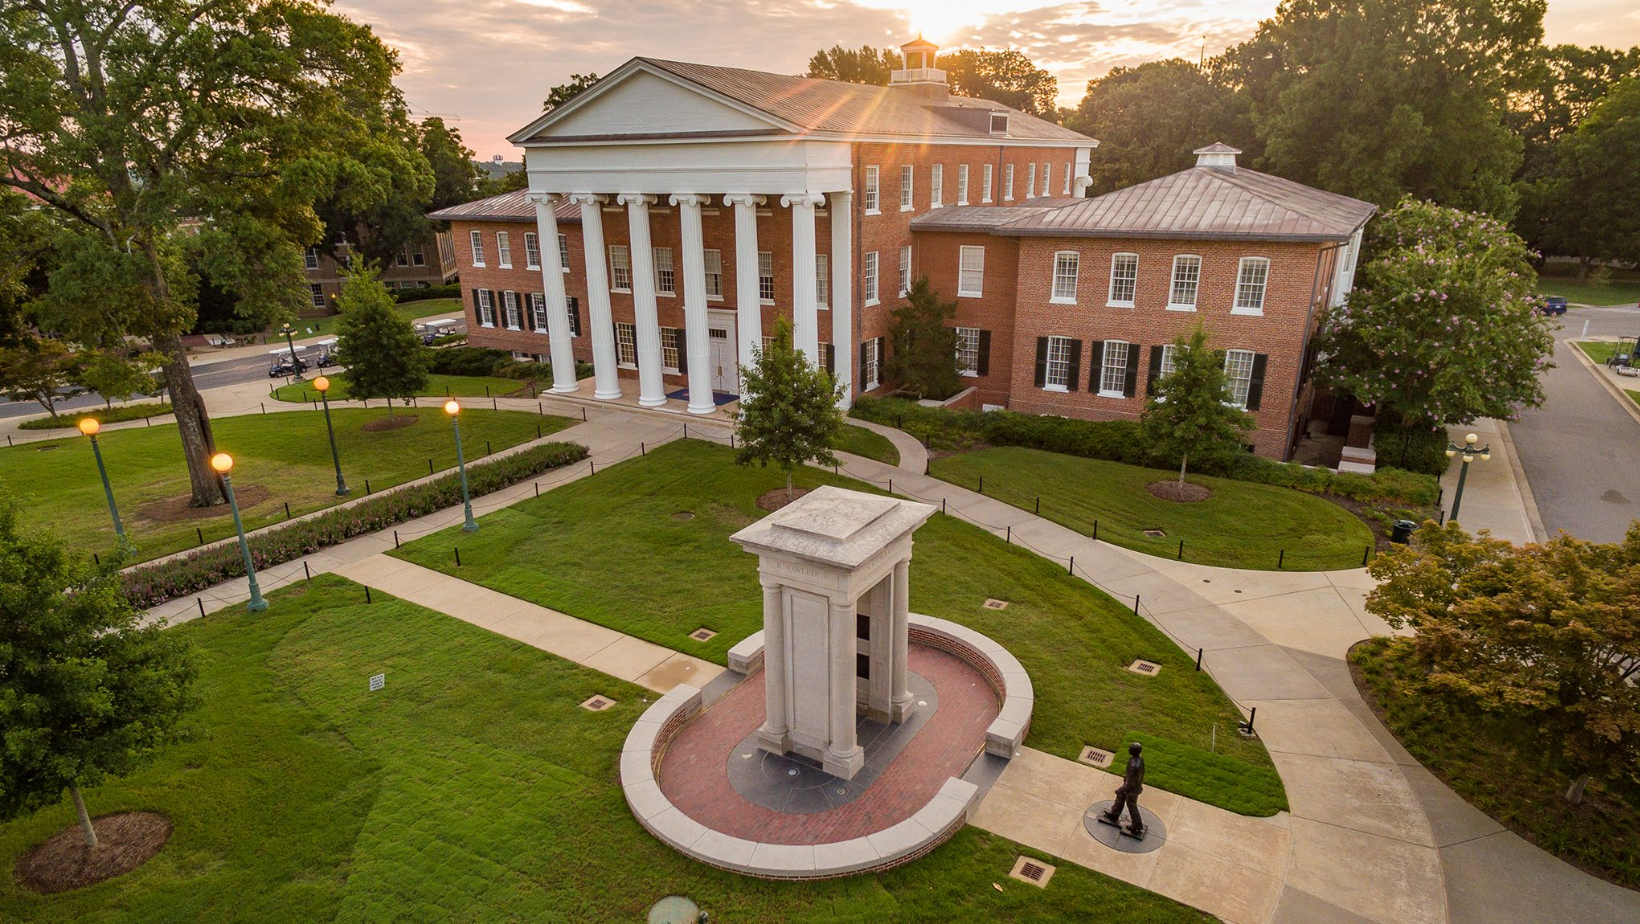 Hotty Toddy! Five Reasons The University of Mississippi Appeals to Midwestern Students